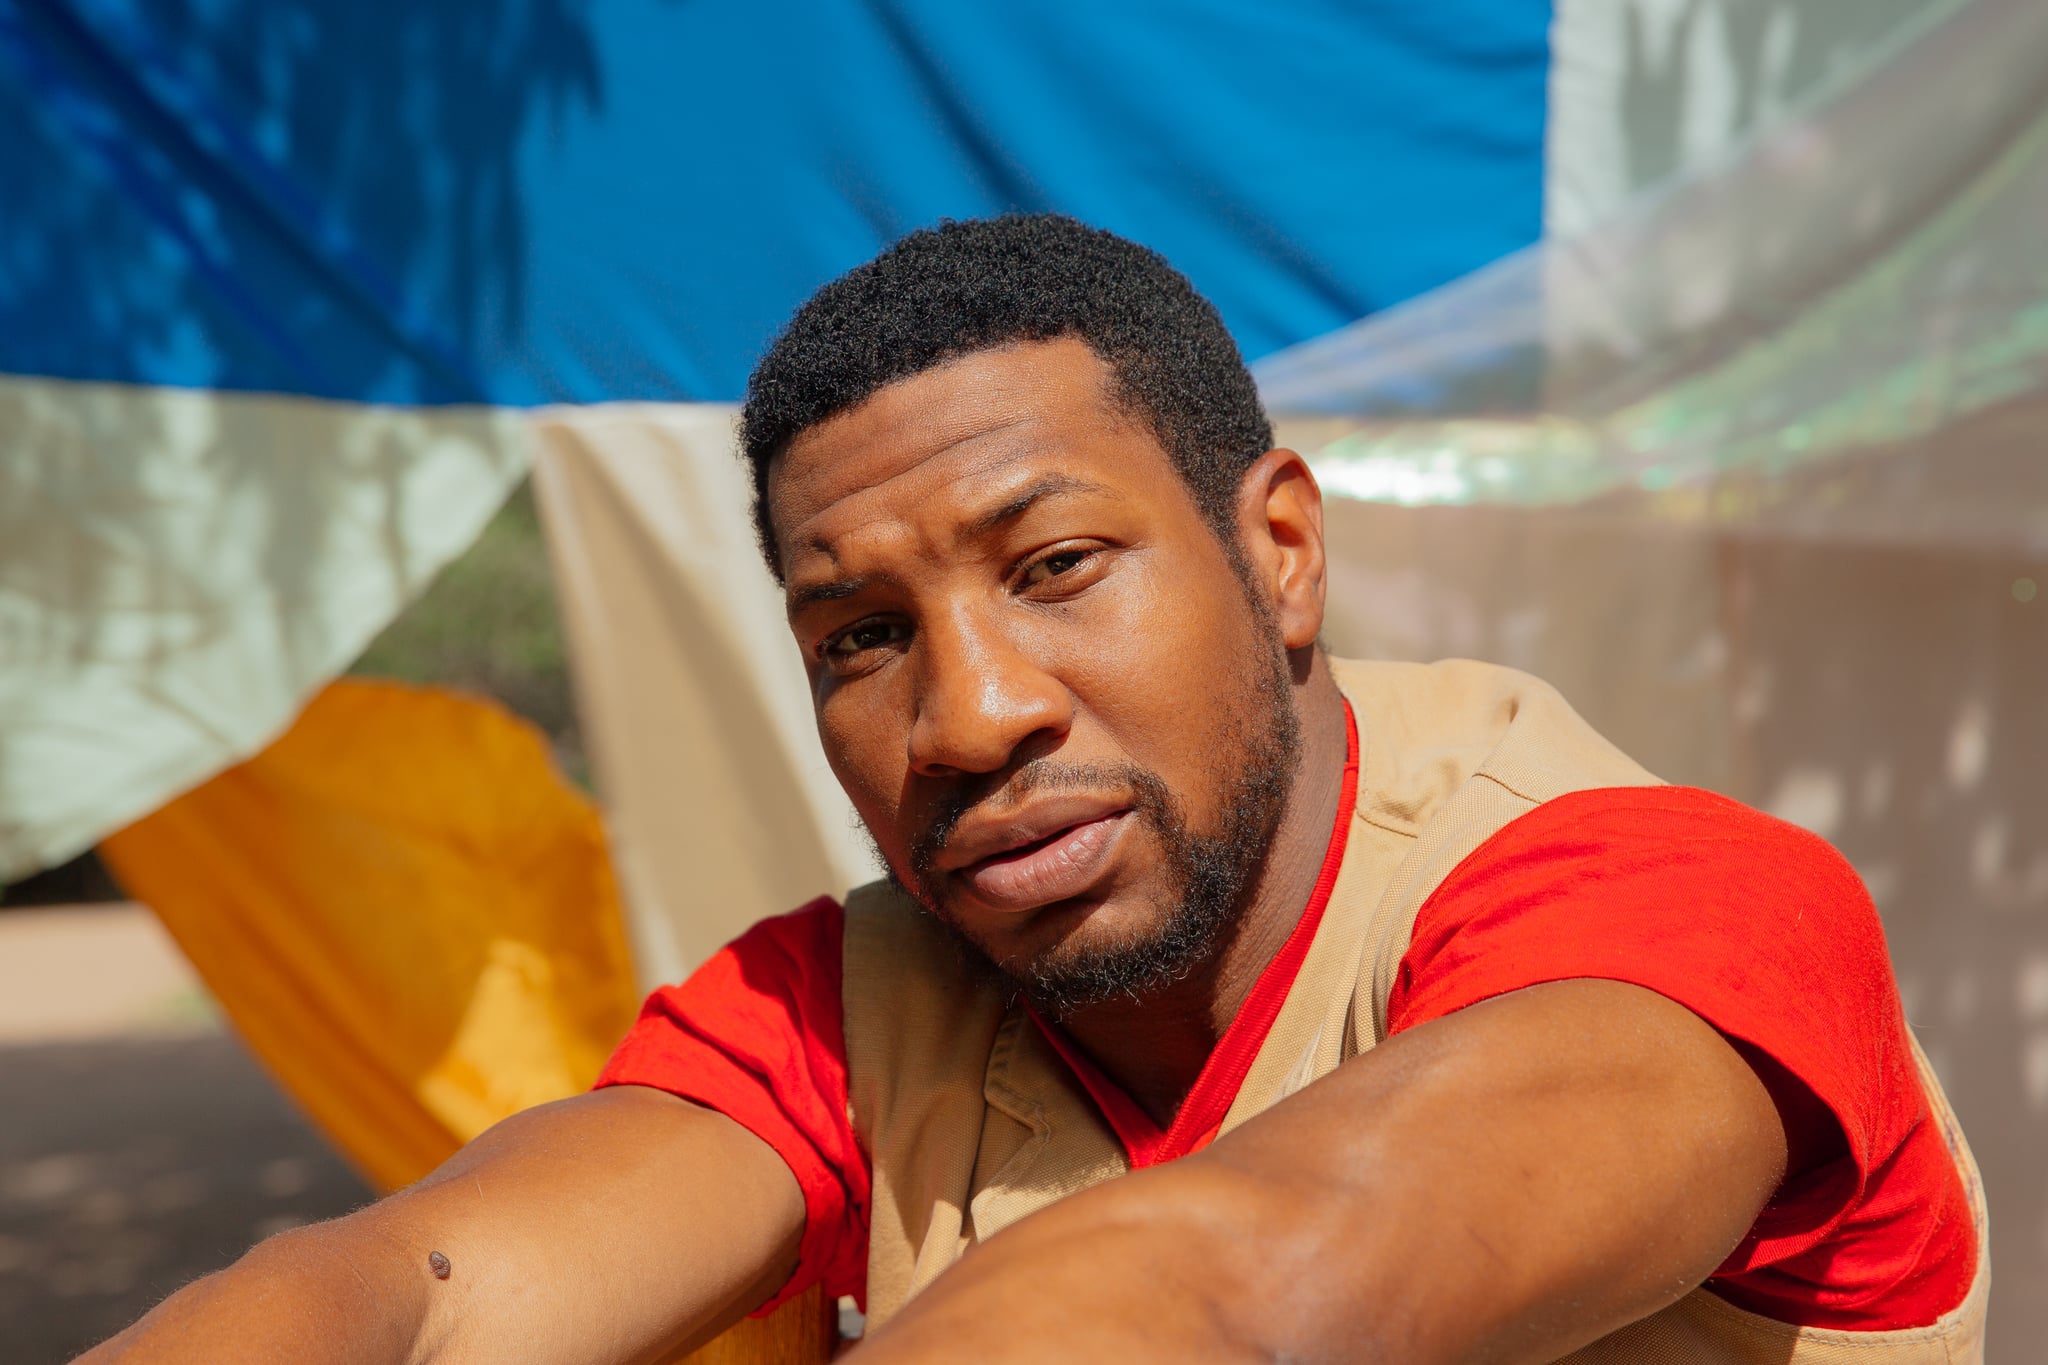 SANTA FE, NM - August 2nd: Jonathan Majors poses for a portrait at his home in Santa Fe, New Mexico on August 2, 2020. Majors is starring in a new HBO series, Lovecraft Country airing August 16, 2020. (Photo by Mary Mathis for The Washington Post via Getty Images)